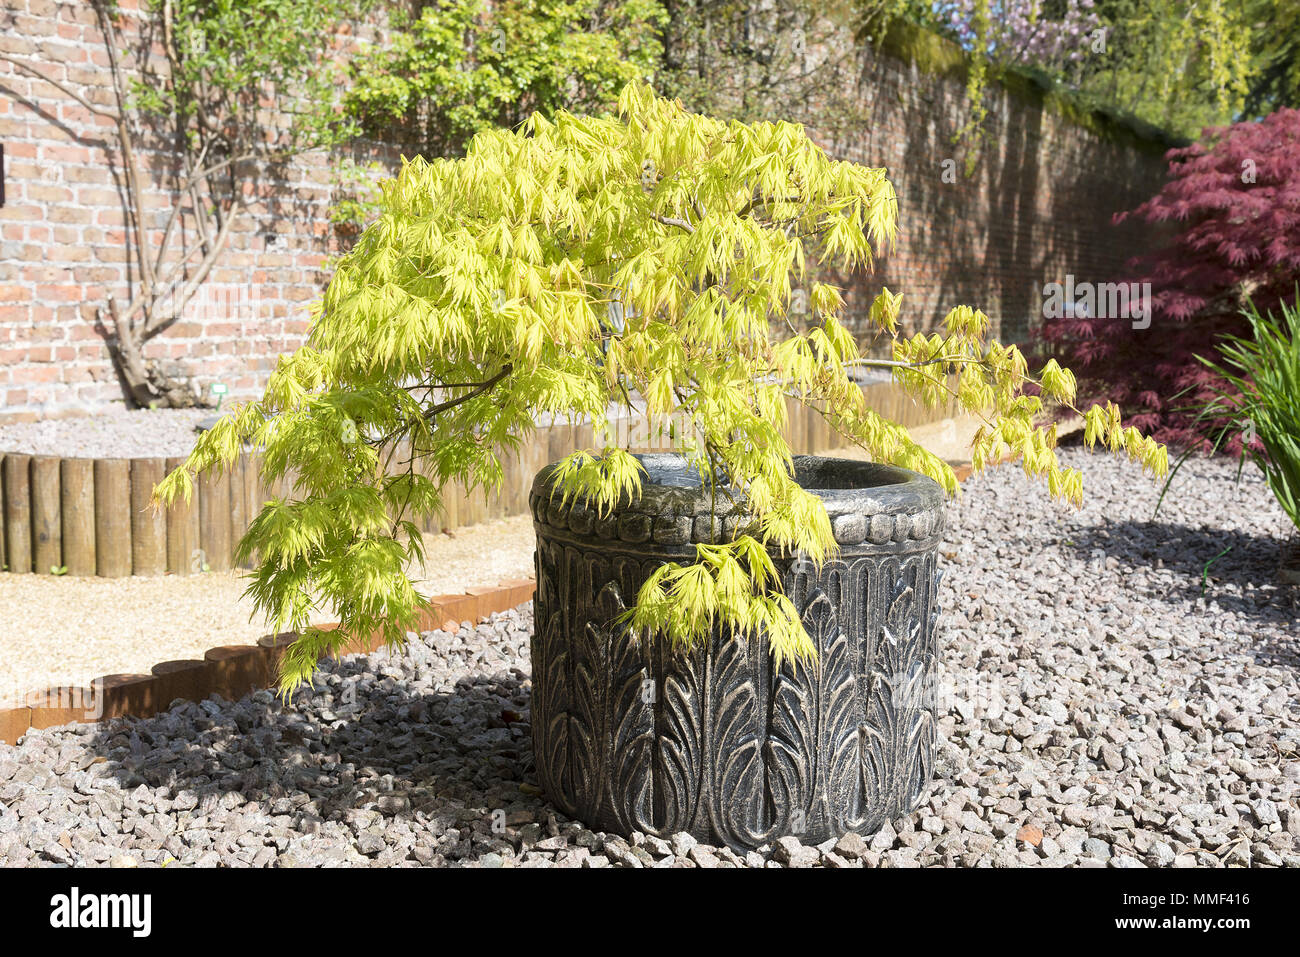 Acer palmatum or Japanese maple shrub growing in a container in an oramental garden with gravel surround. Stock Photo